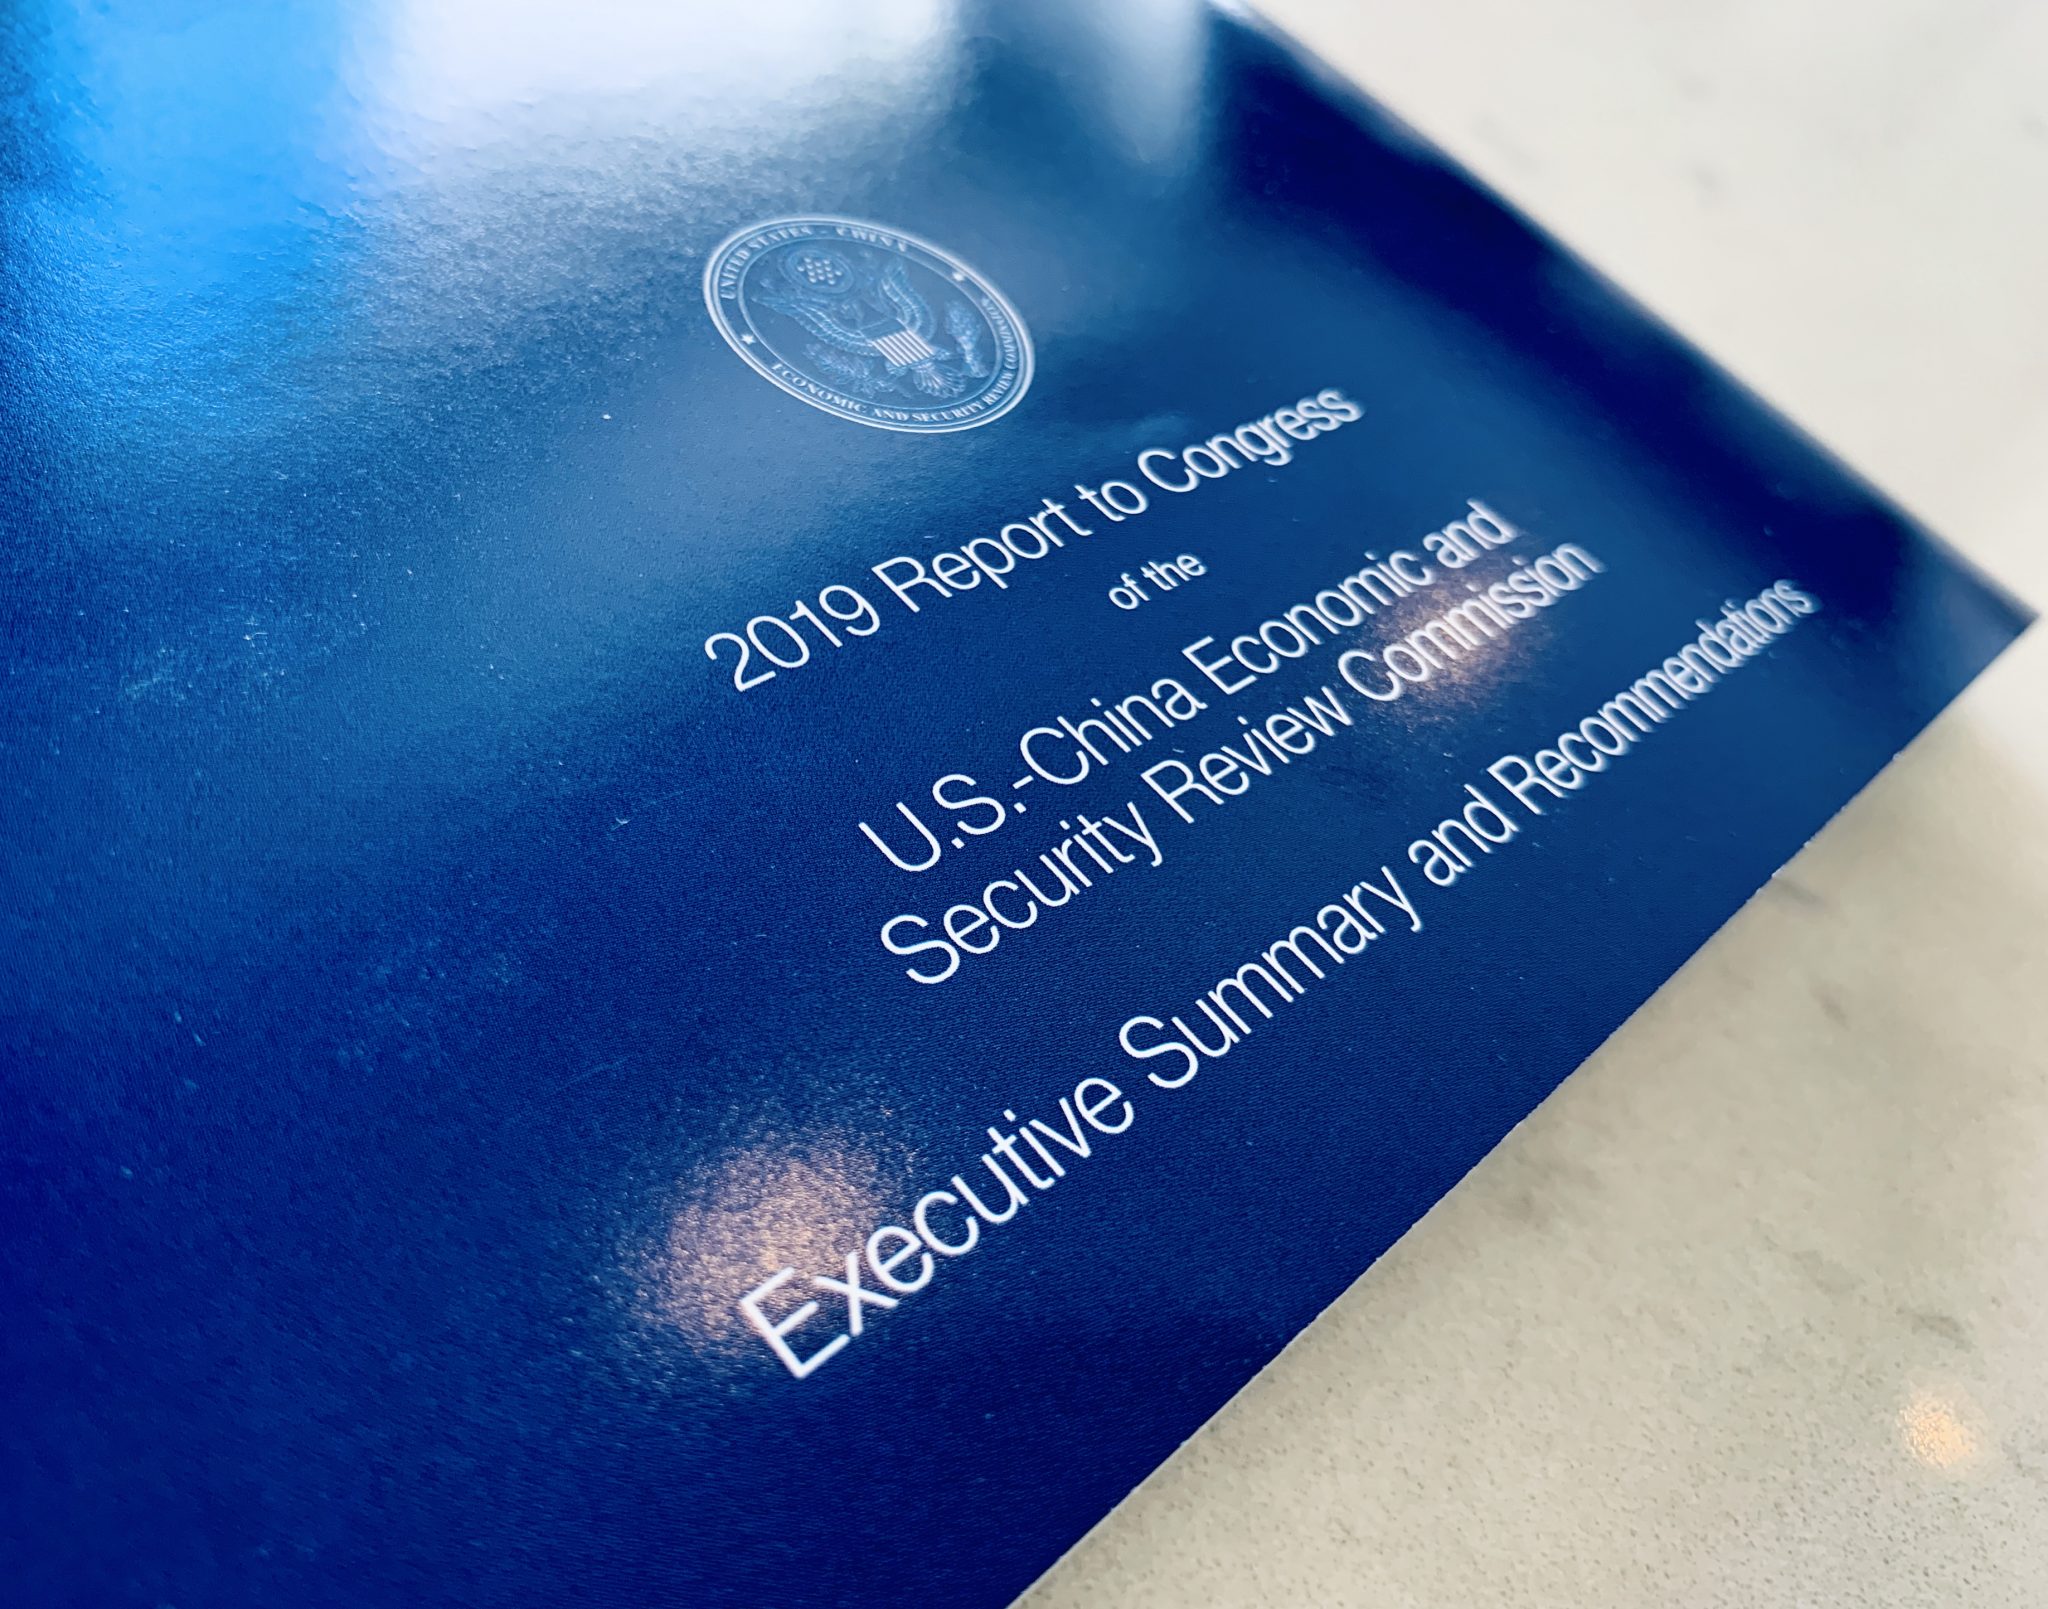 “Executive Summary and Recommendations” of the U.S.-China Economic and Security Review Commission 2019 Annual Report to Congress